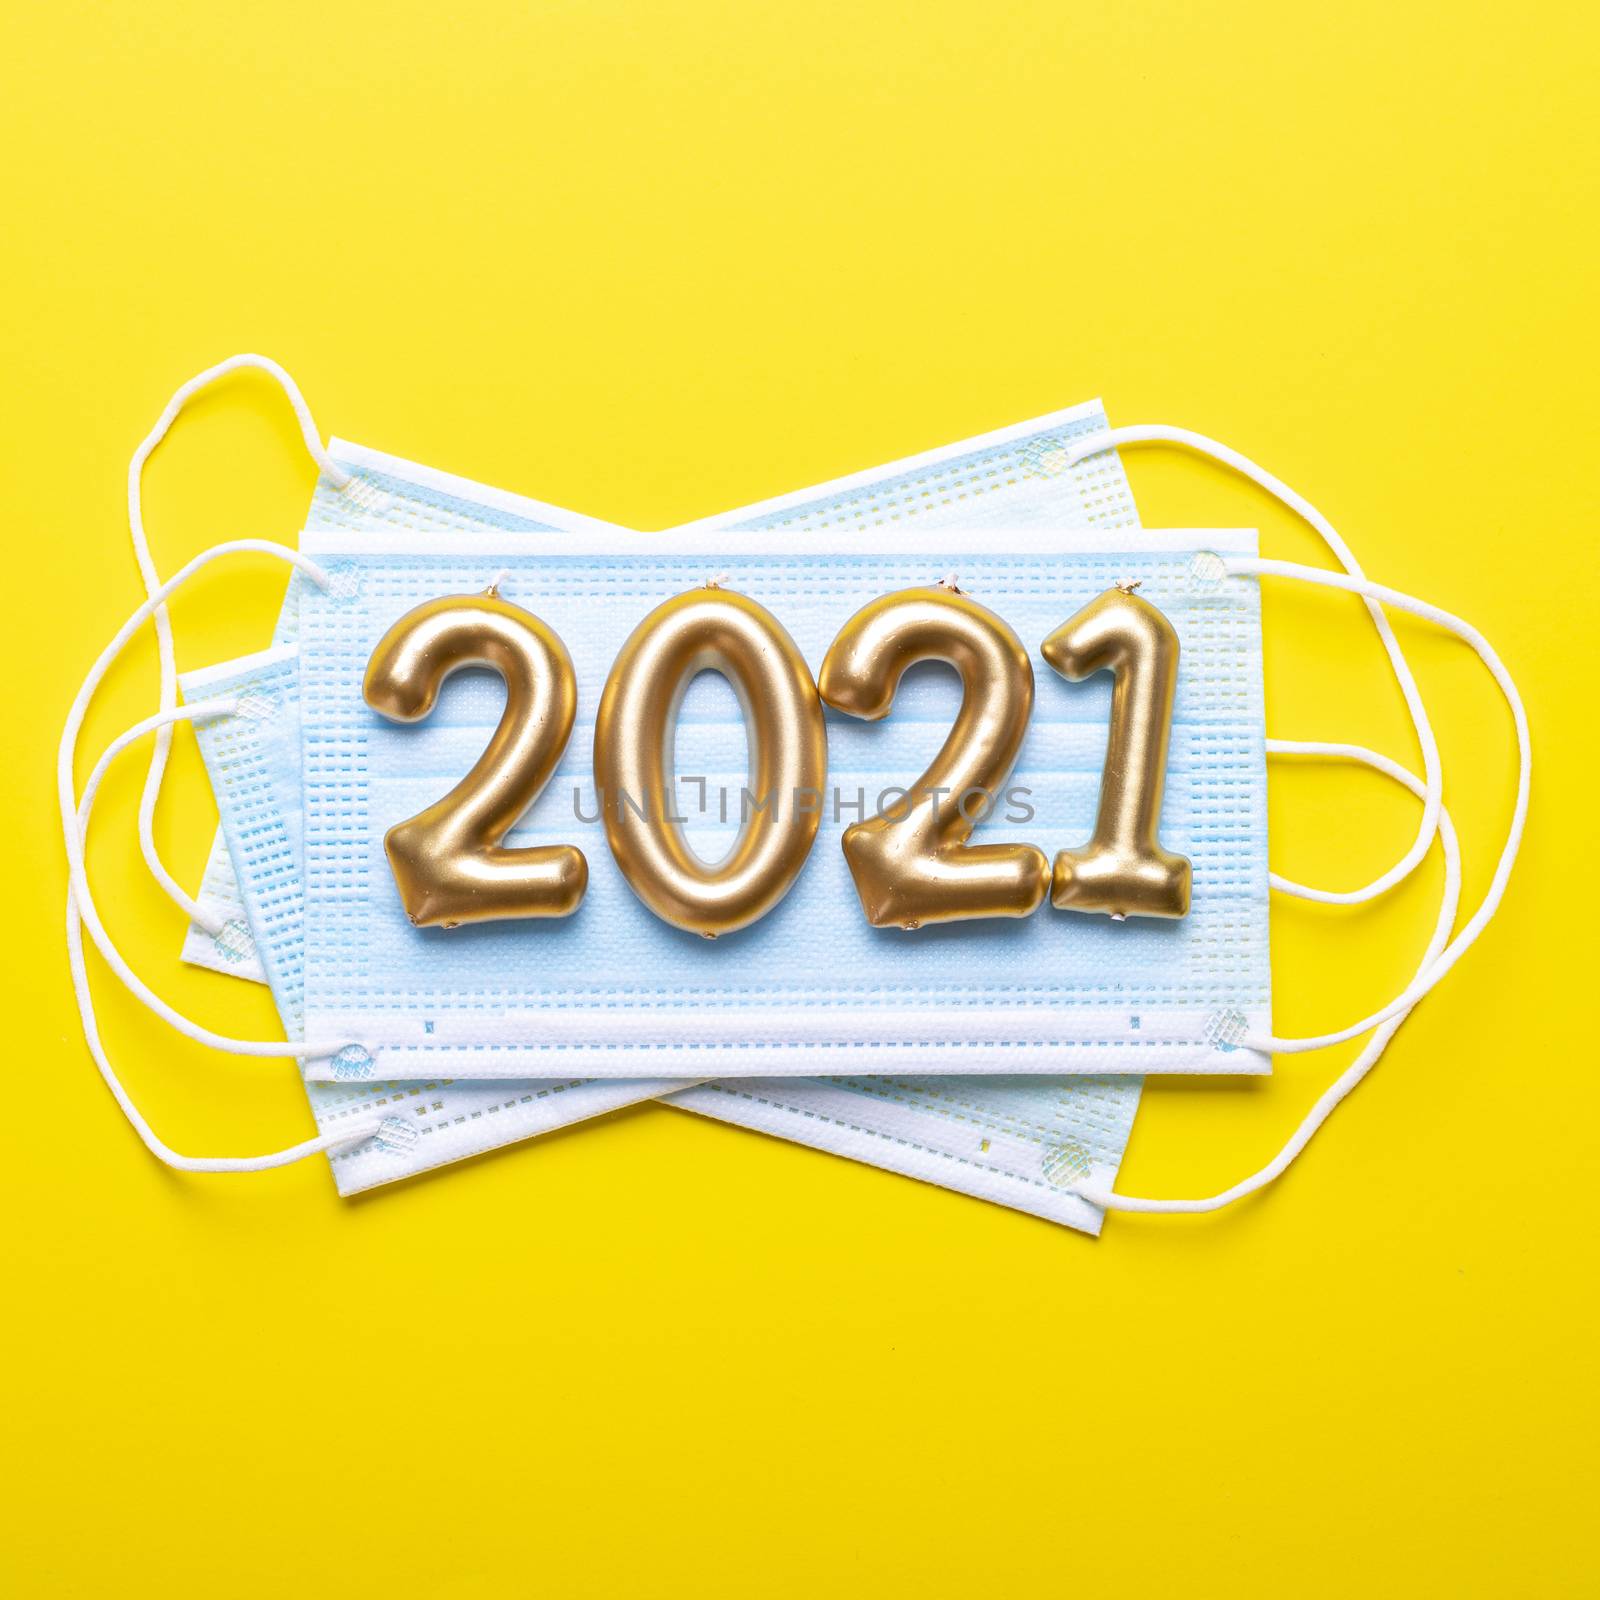 New year 2021 with face mask on yellow background by adamr